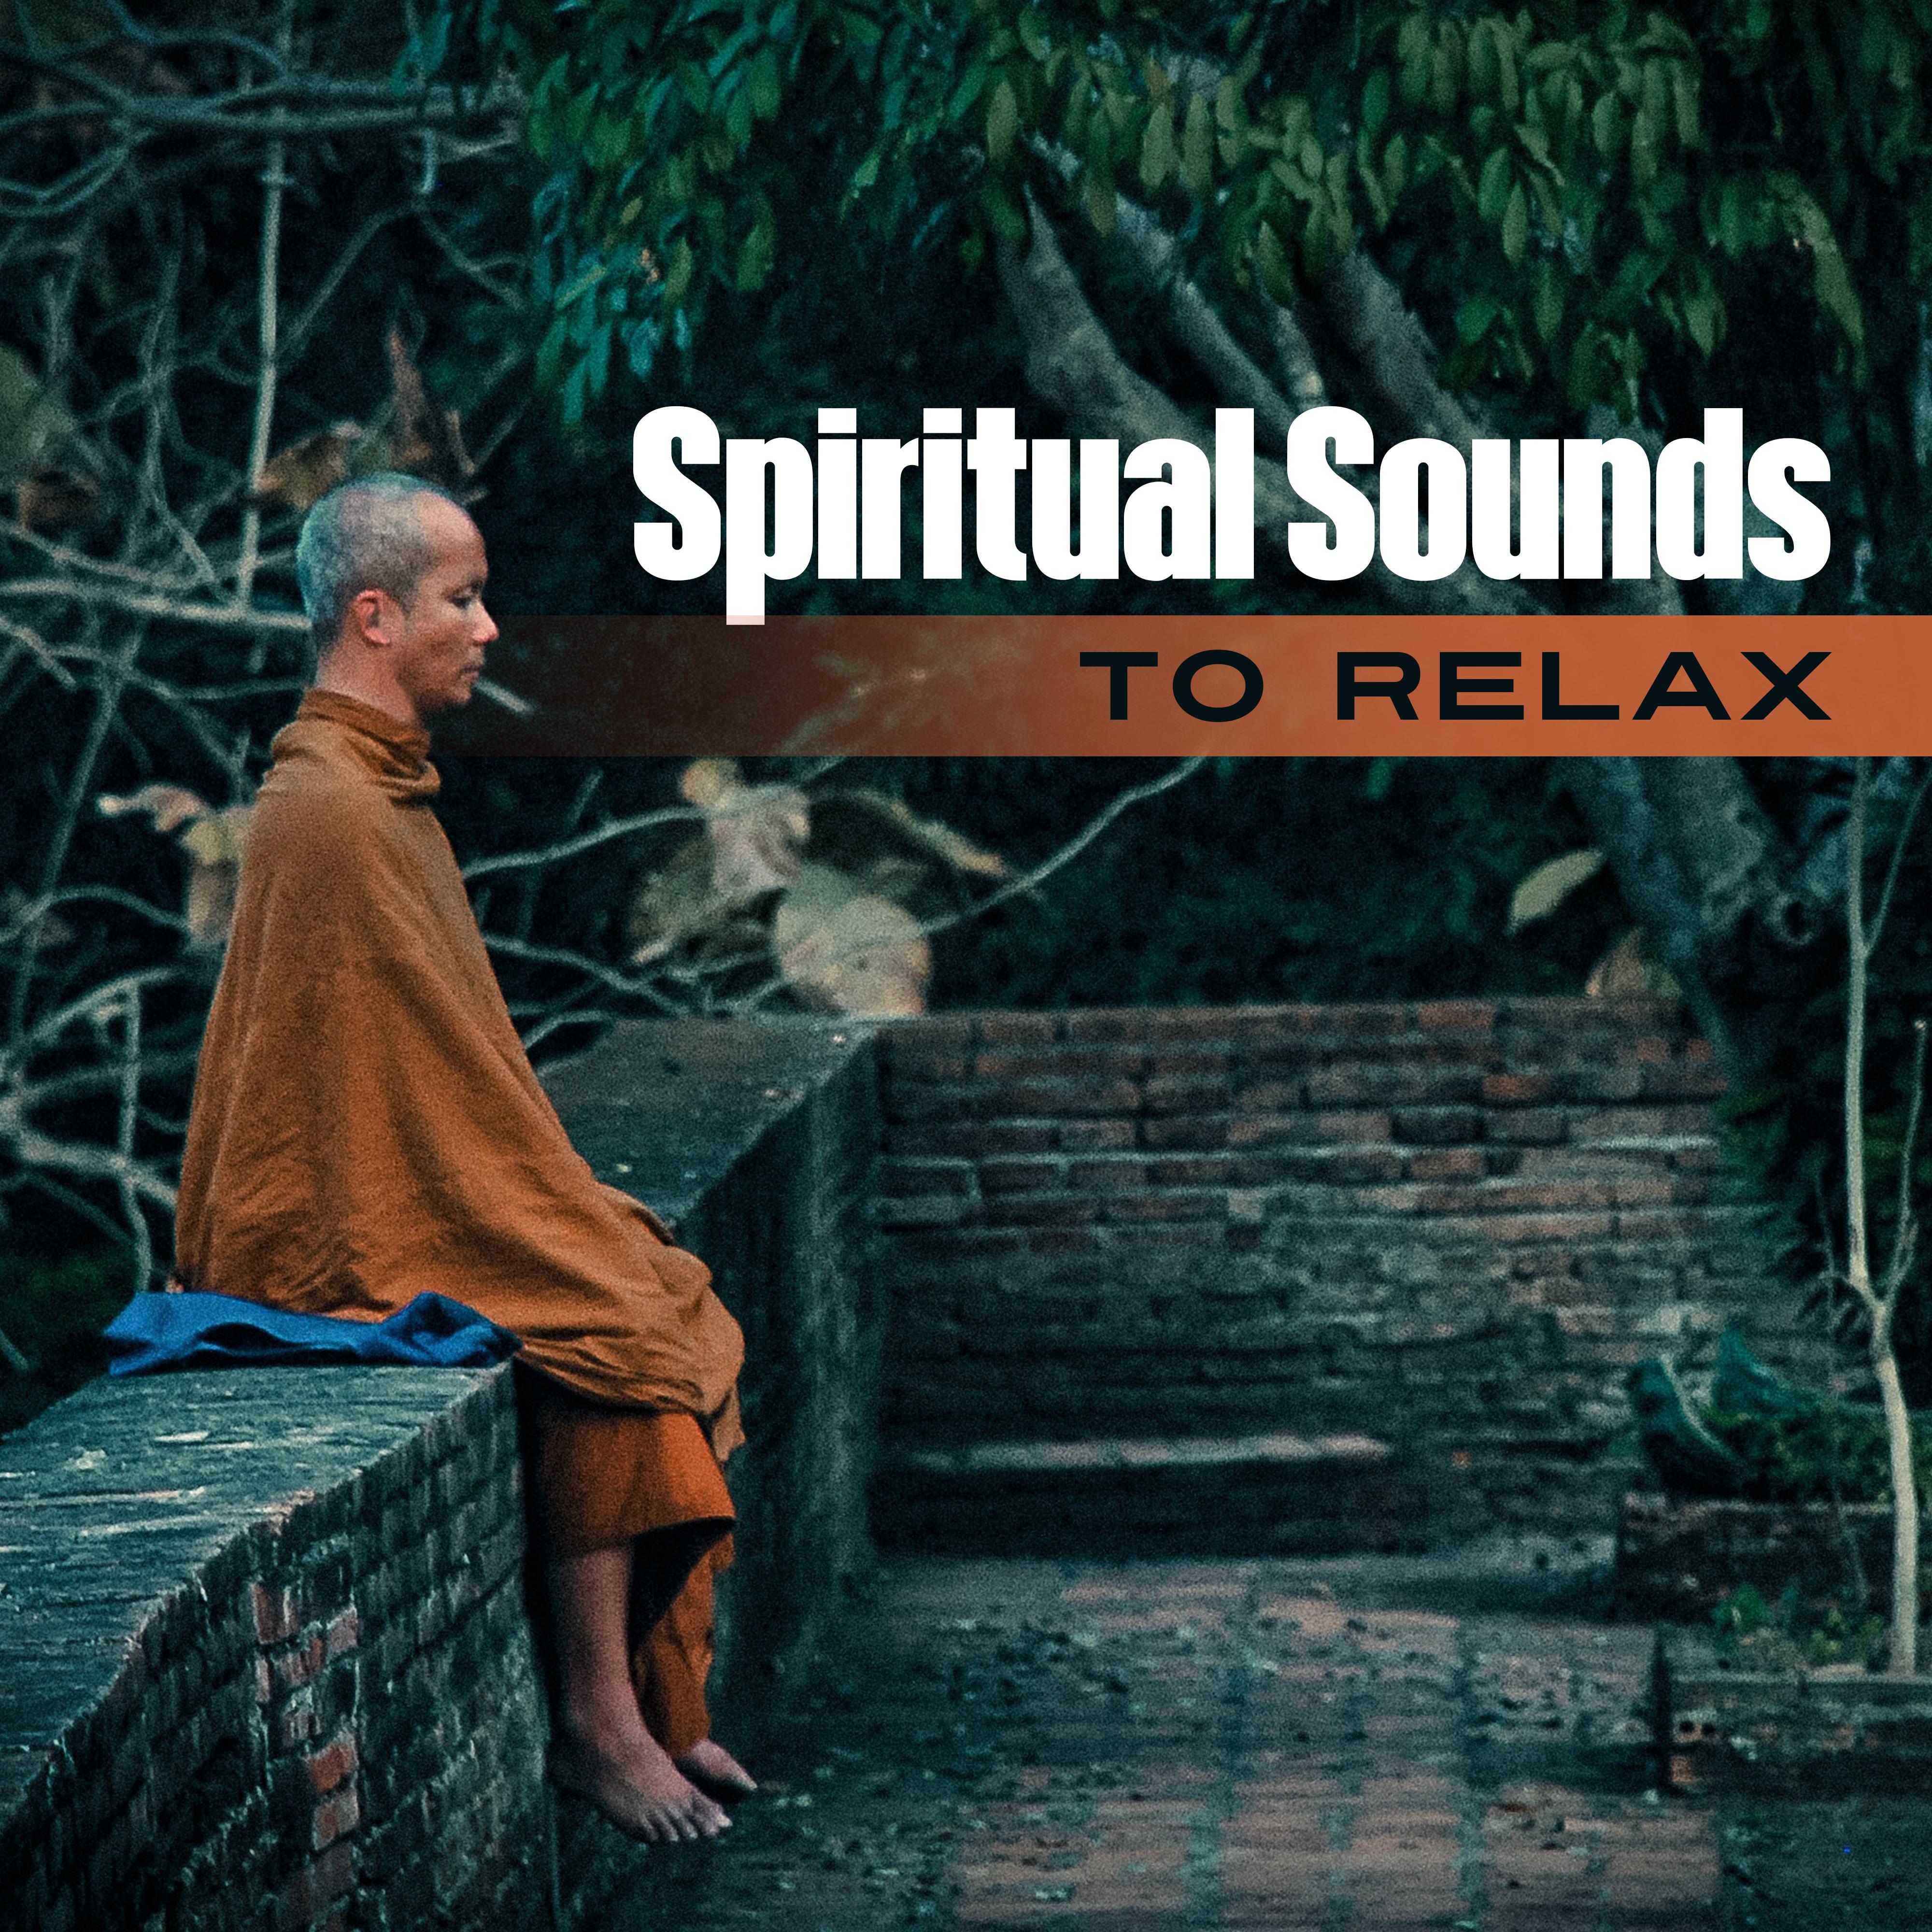 Spiritual Sounds to Relax – Calm Music to Meditate, New Age Songs, Buddha Lounge, Peaceful Mind & Body